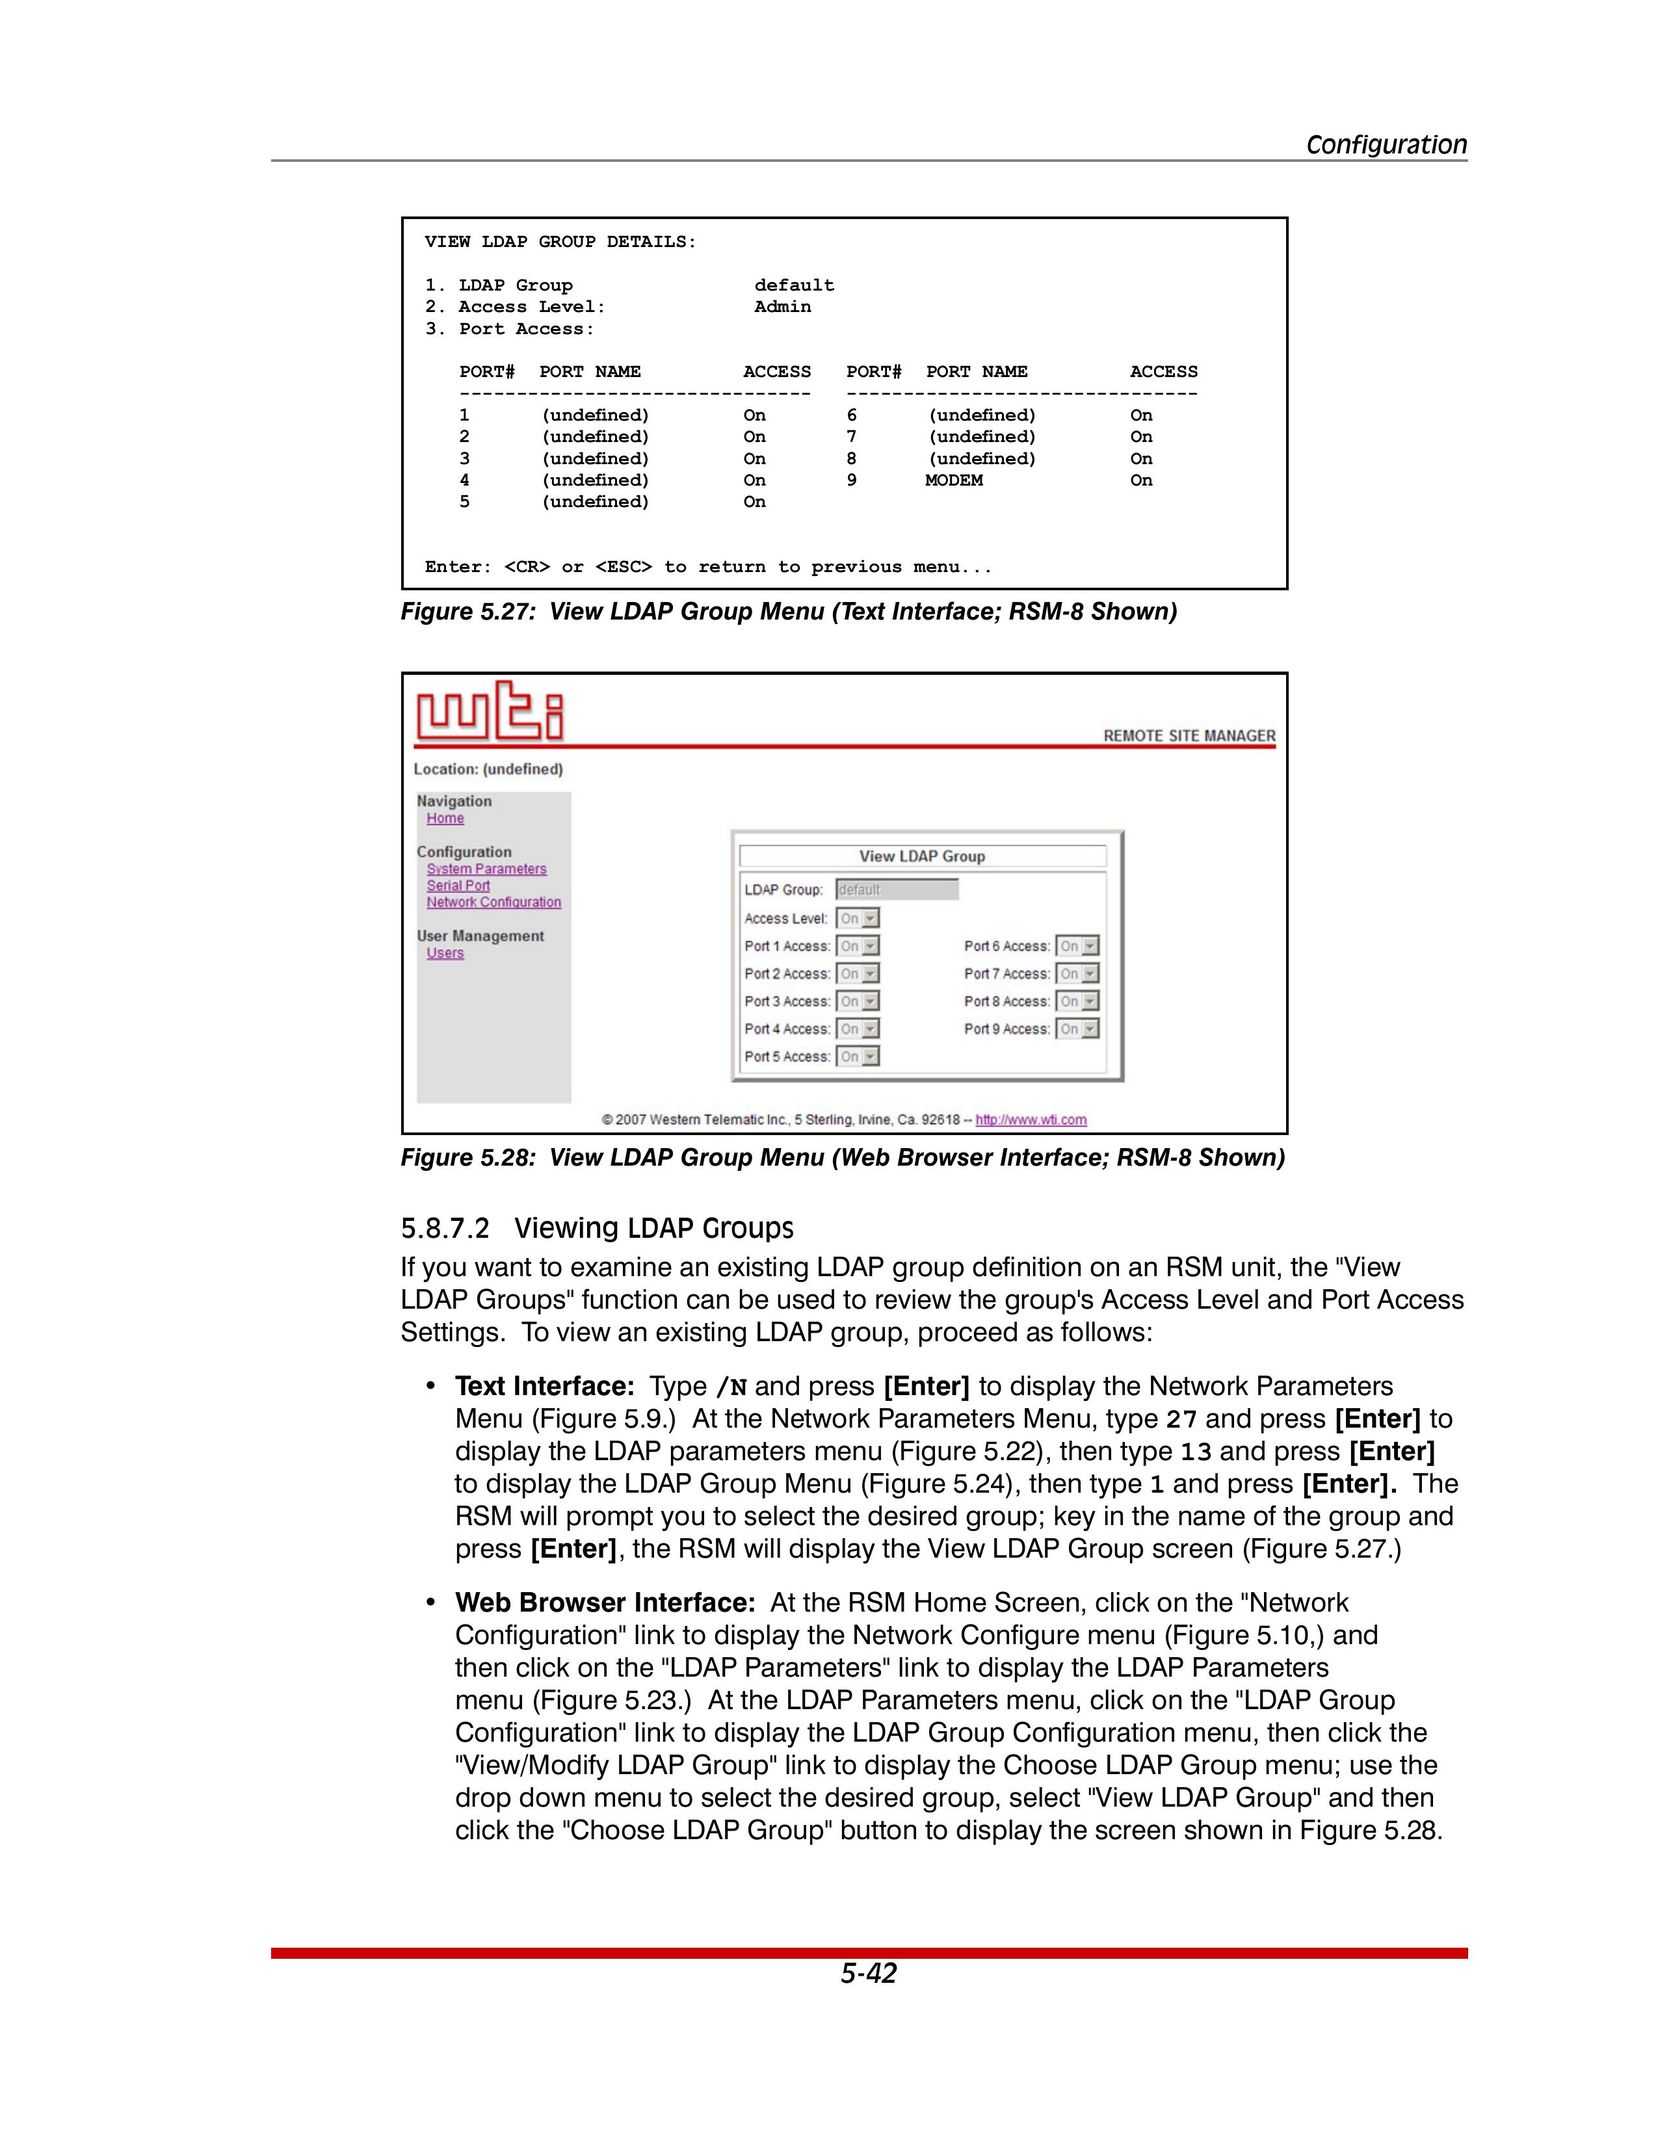 Western Telematic RSM-8 Video Gaming Accessories User Manual (Page 61)